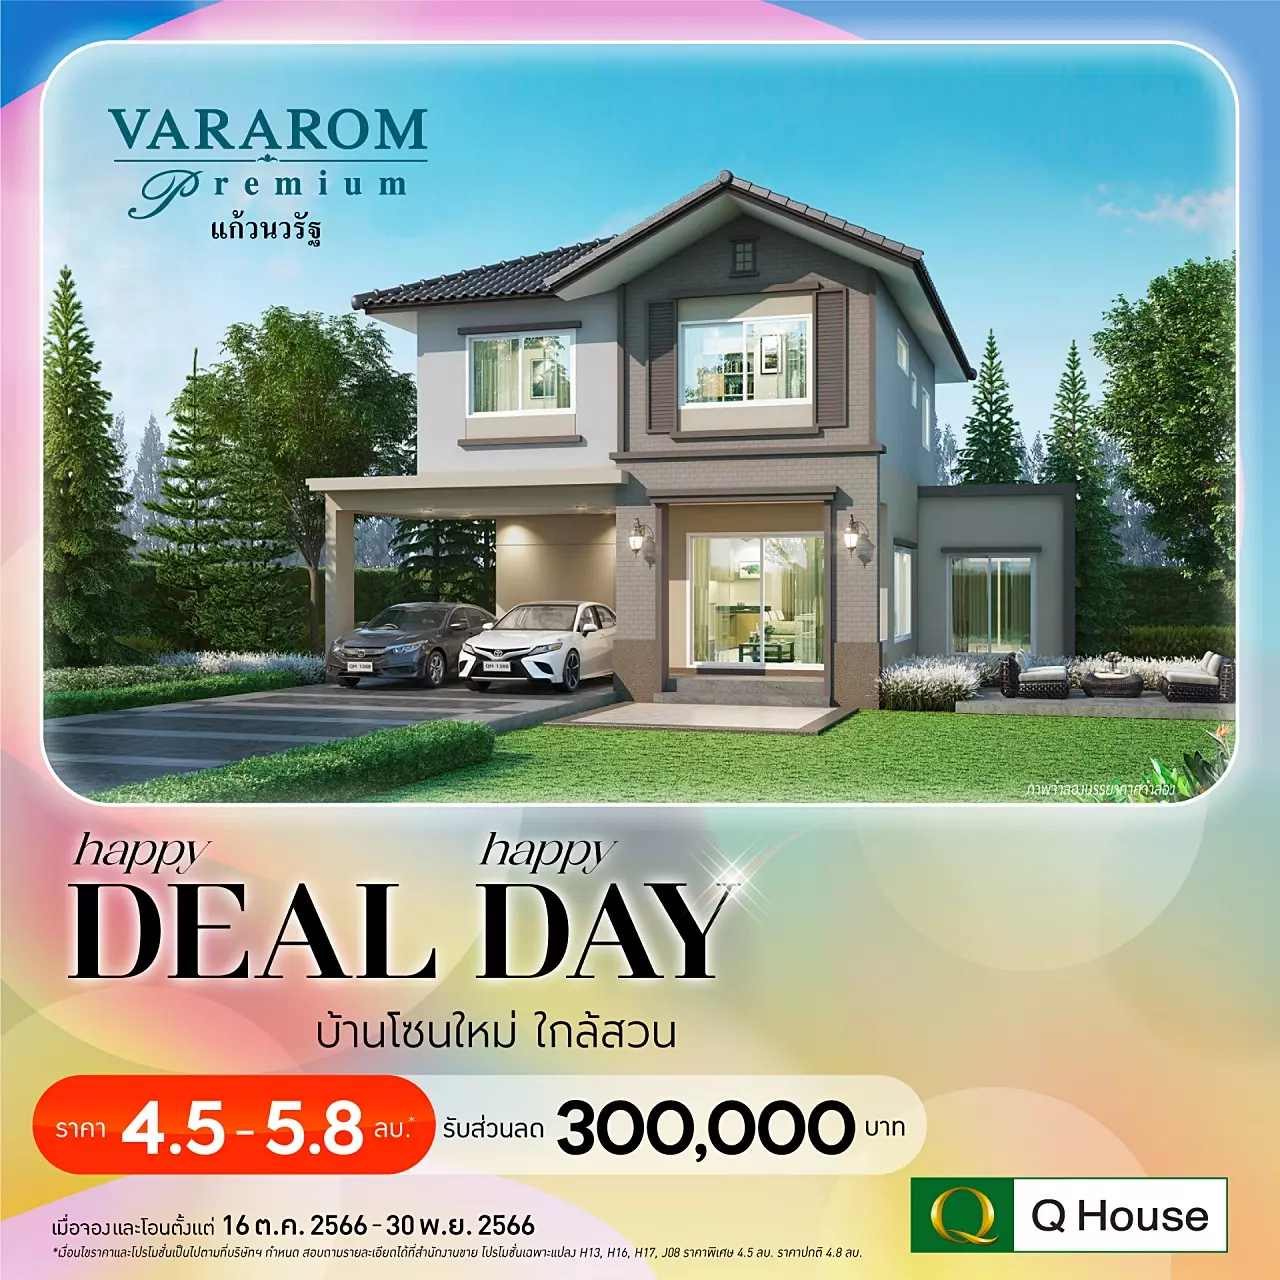 Happy Deal - Happy Day!